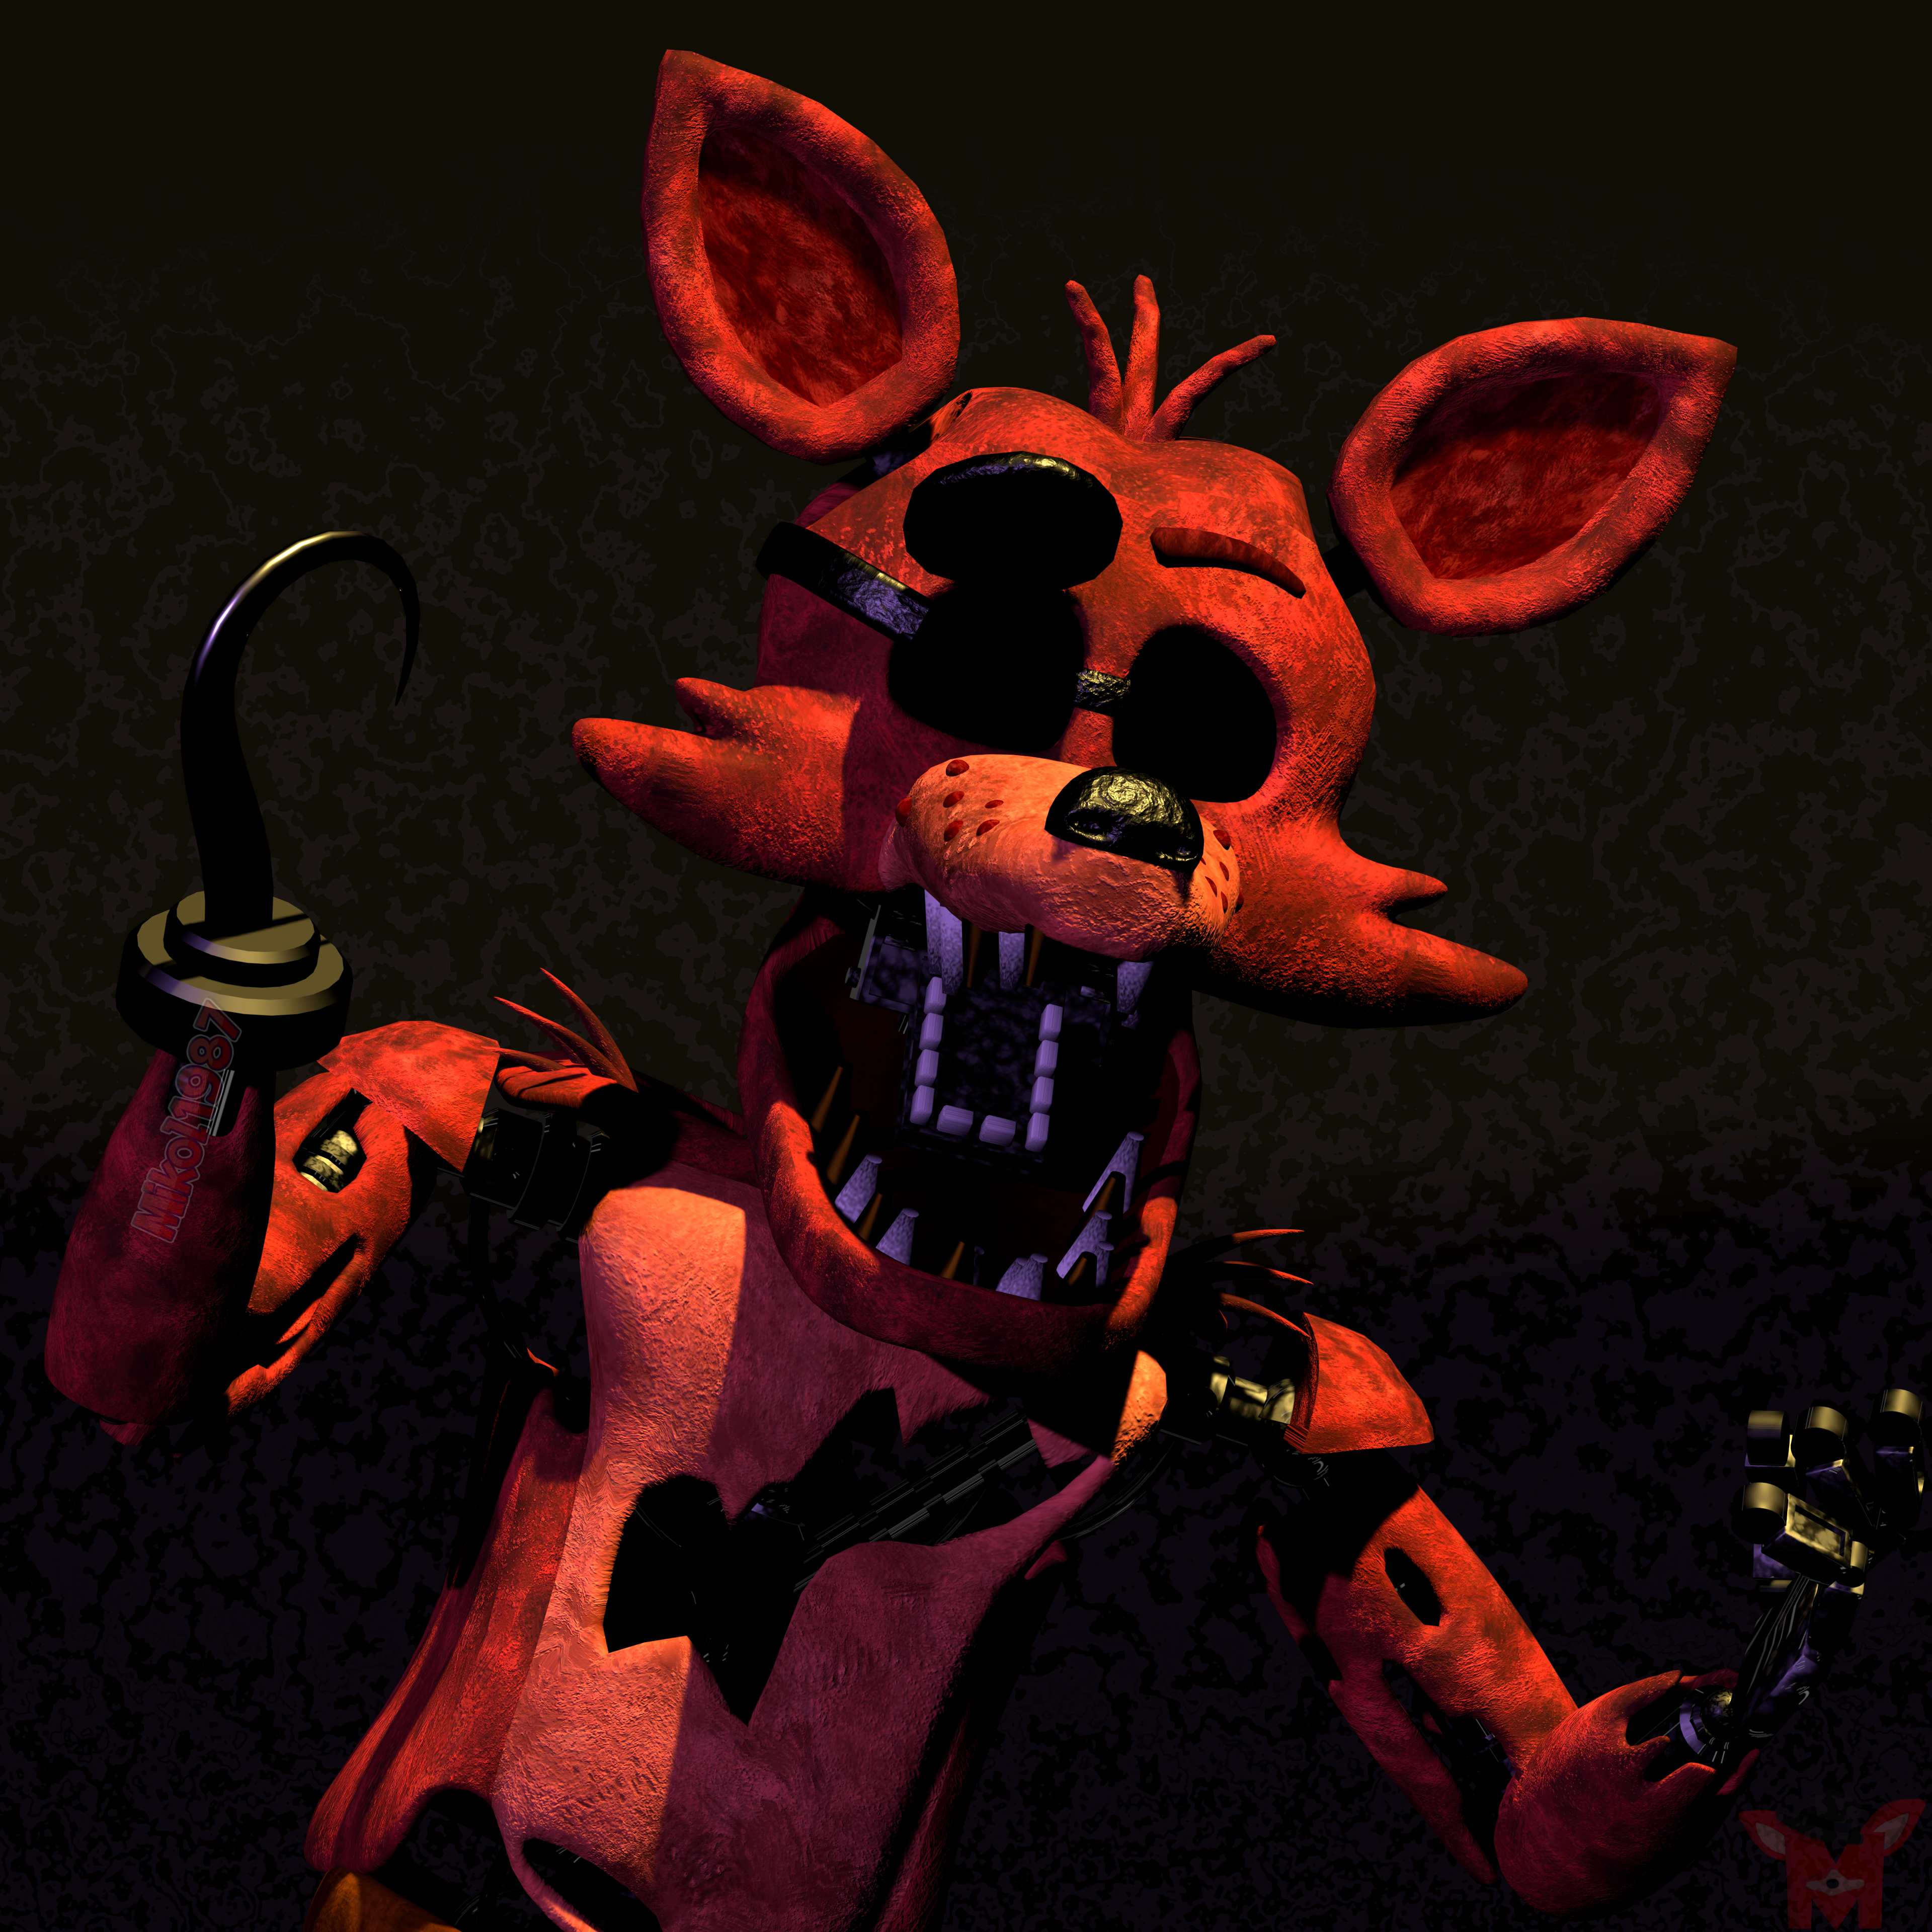 SFM FNAF) Withered Foxy Poster by MysticMCMFP on DeviantArt